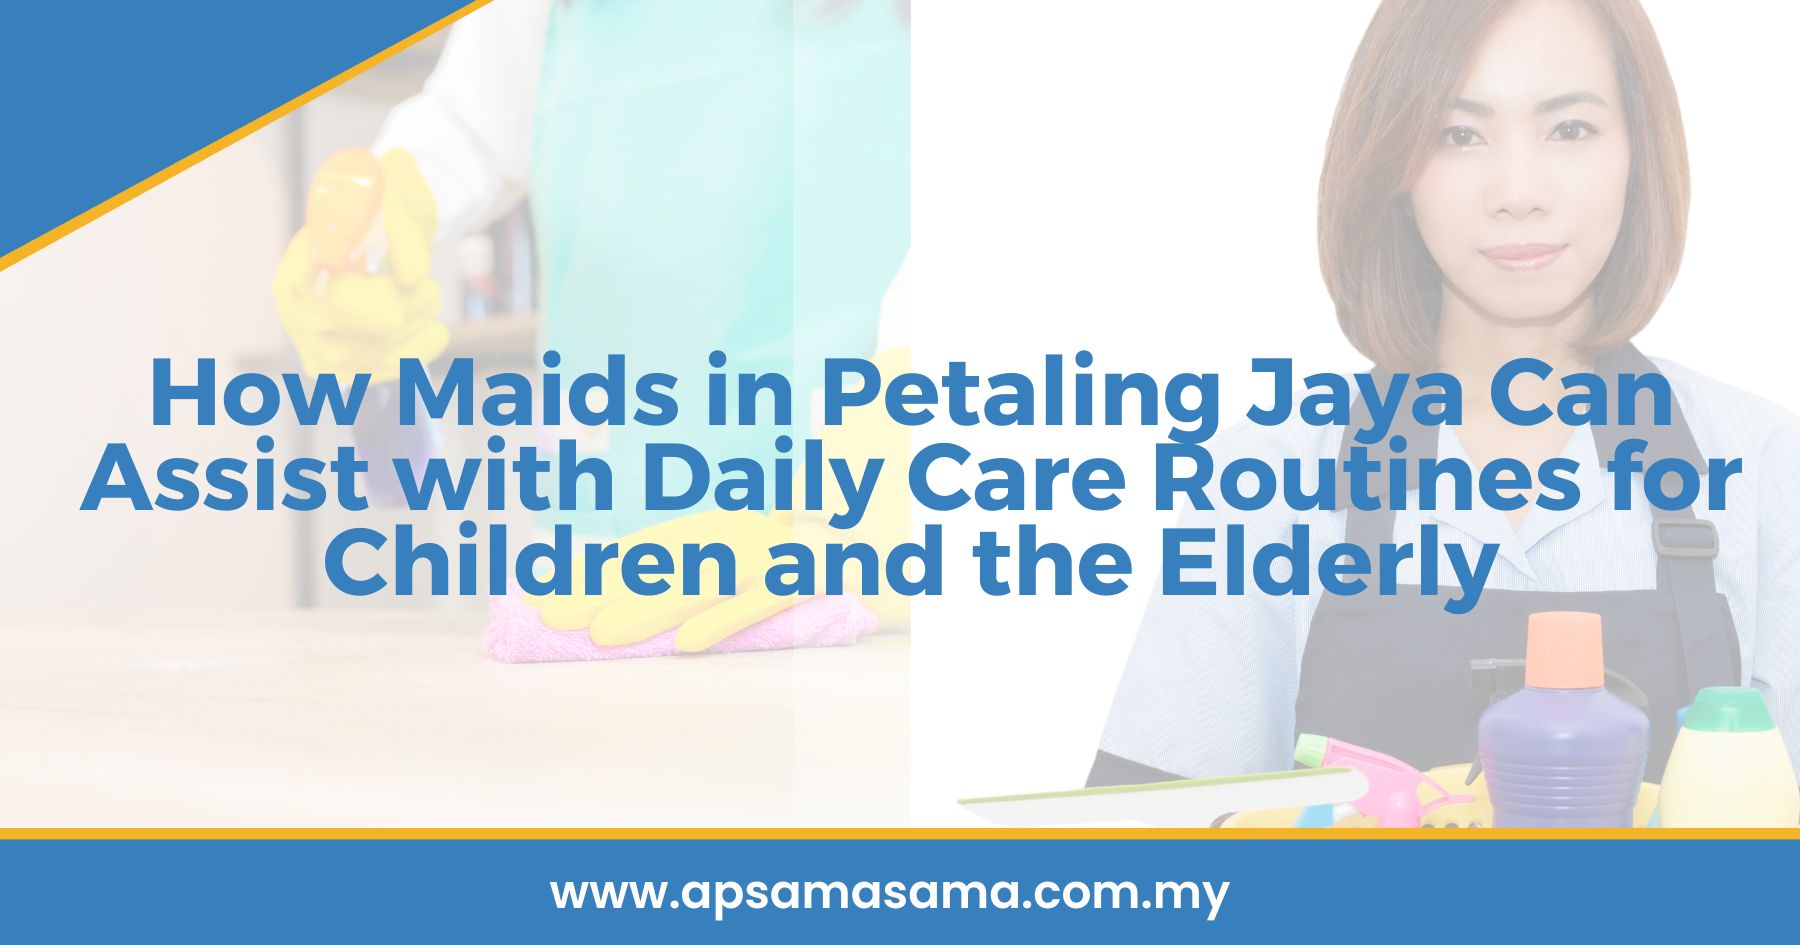 How Maids in Petaling Jaya Can Assist with Daily Care Routines for Children and the Elderly